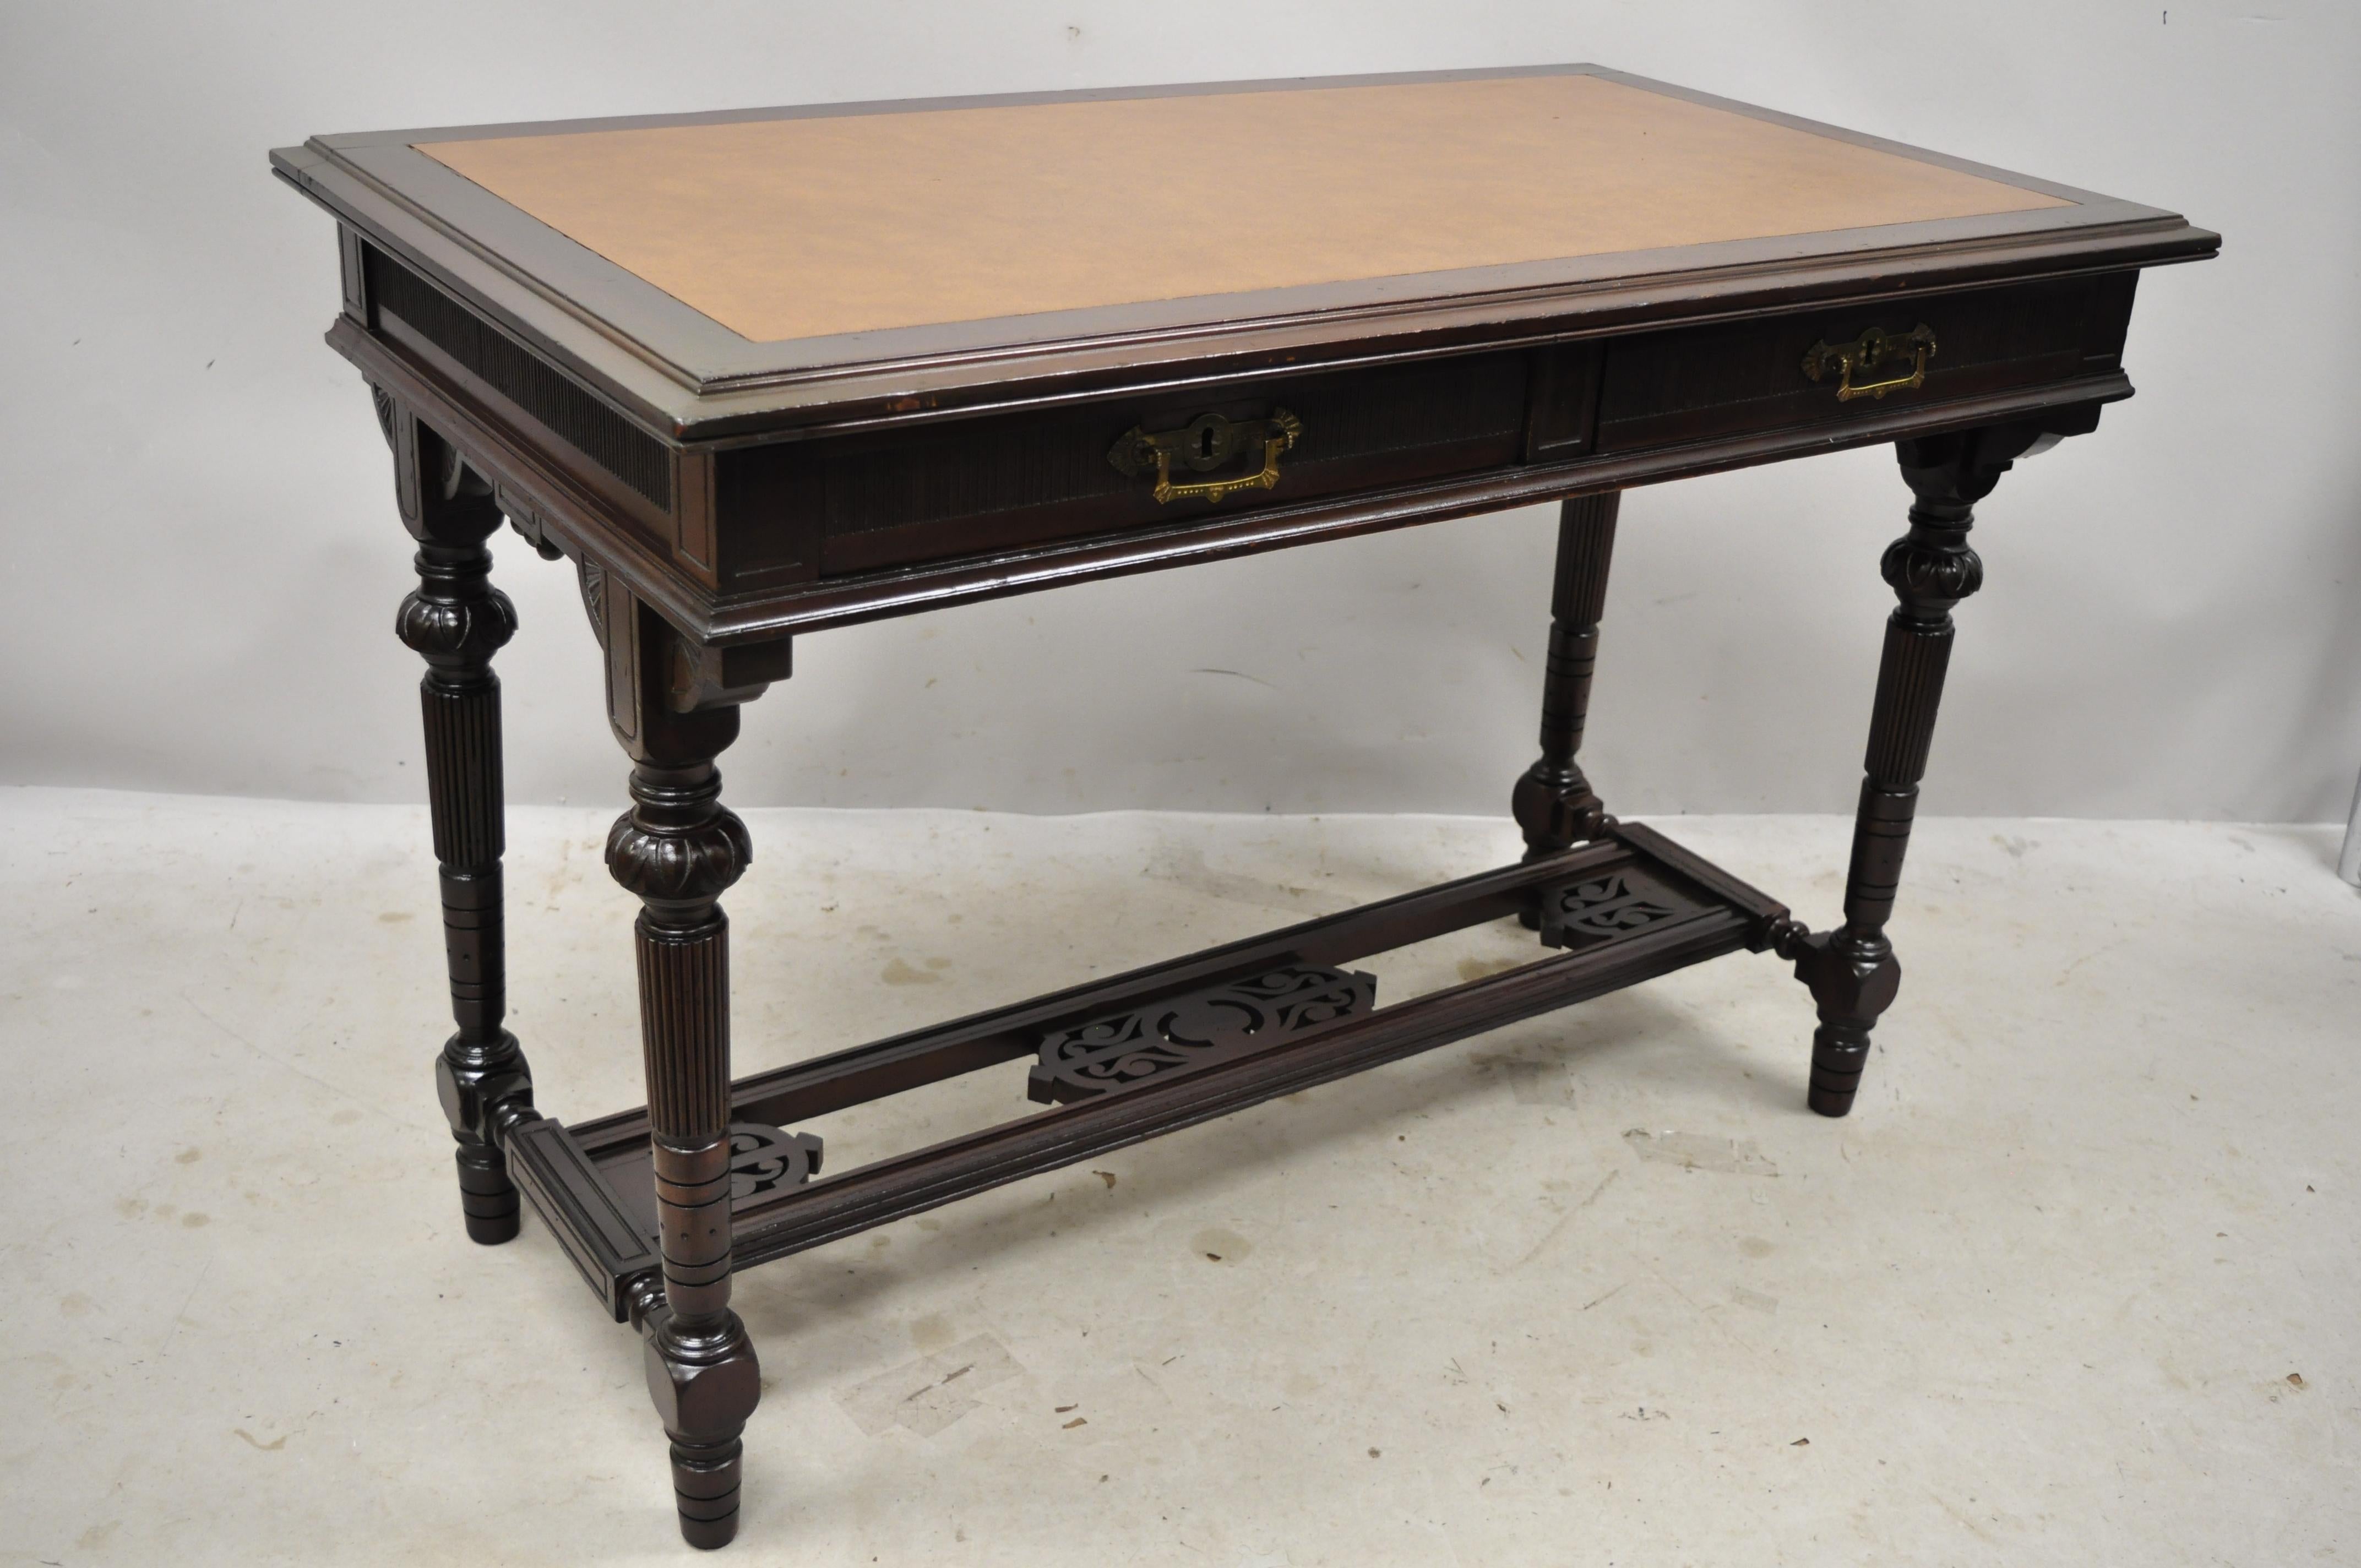 Antique Eastlake Victorian two drawer carved walnut library table desk. Item features solid wood construction, nicely carved details, finished back, no key, but unlocked, 2 dovetailed drawers, solid brass hardware, very nice antique item, quality